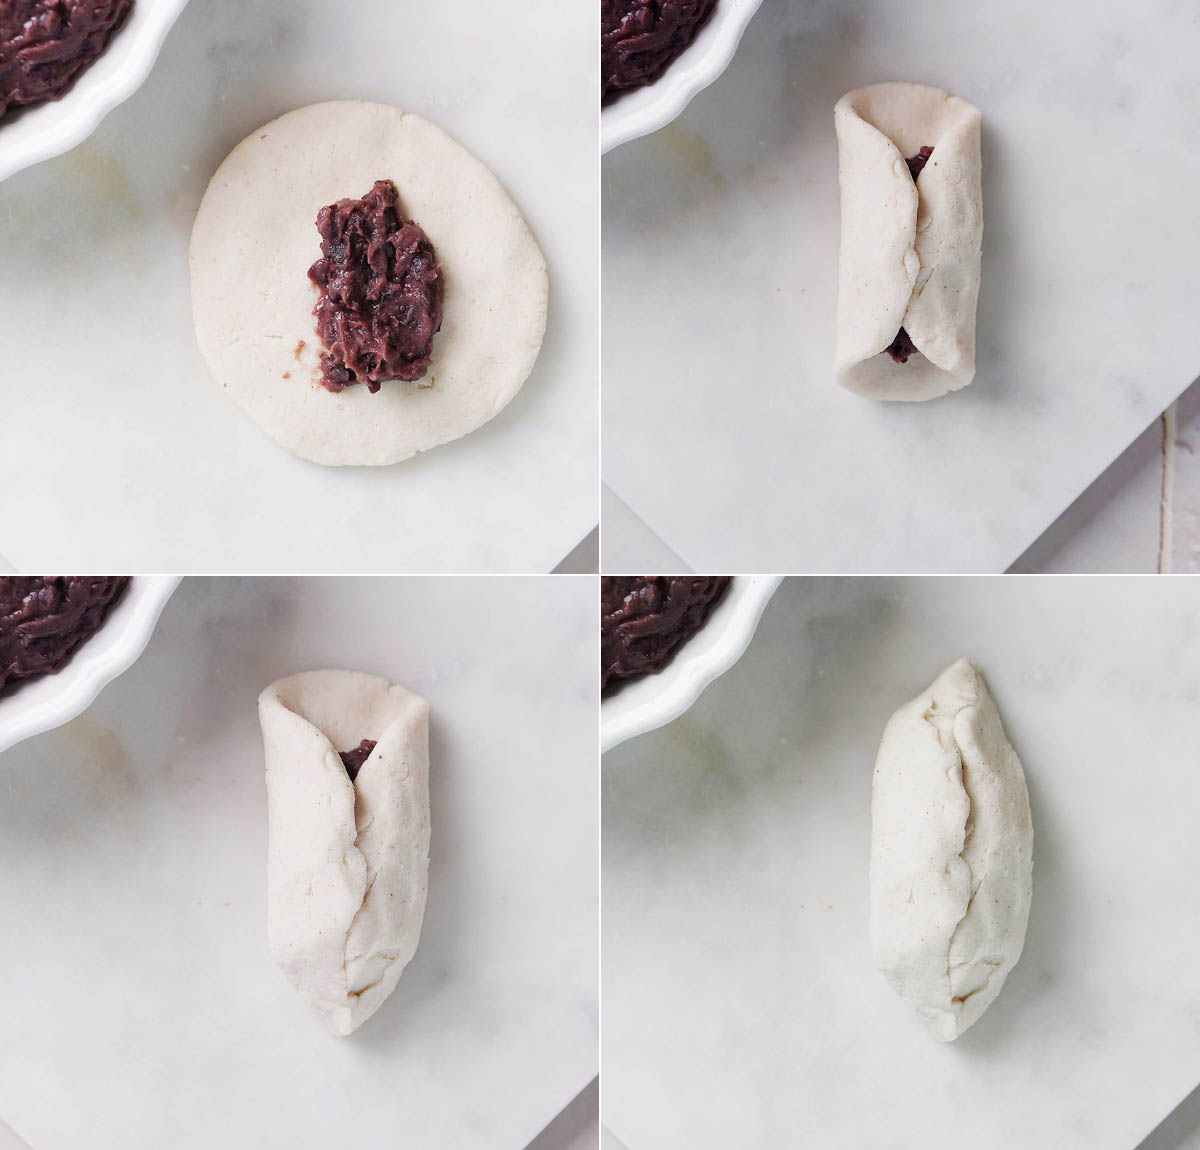 Images of putting beans inside the masa dough and shaping the tlacoyos.